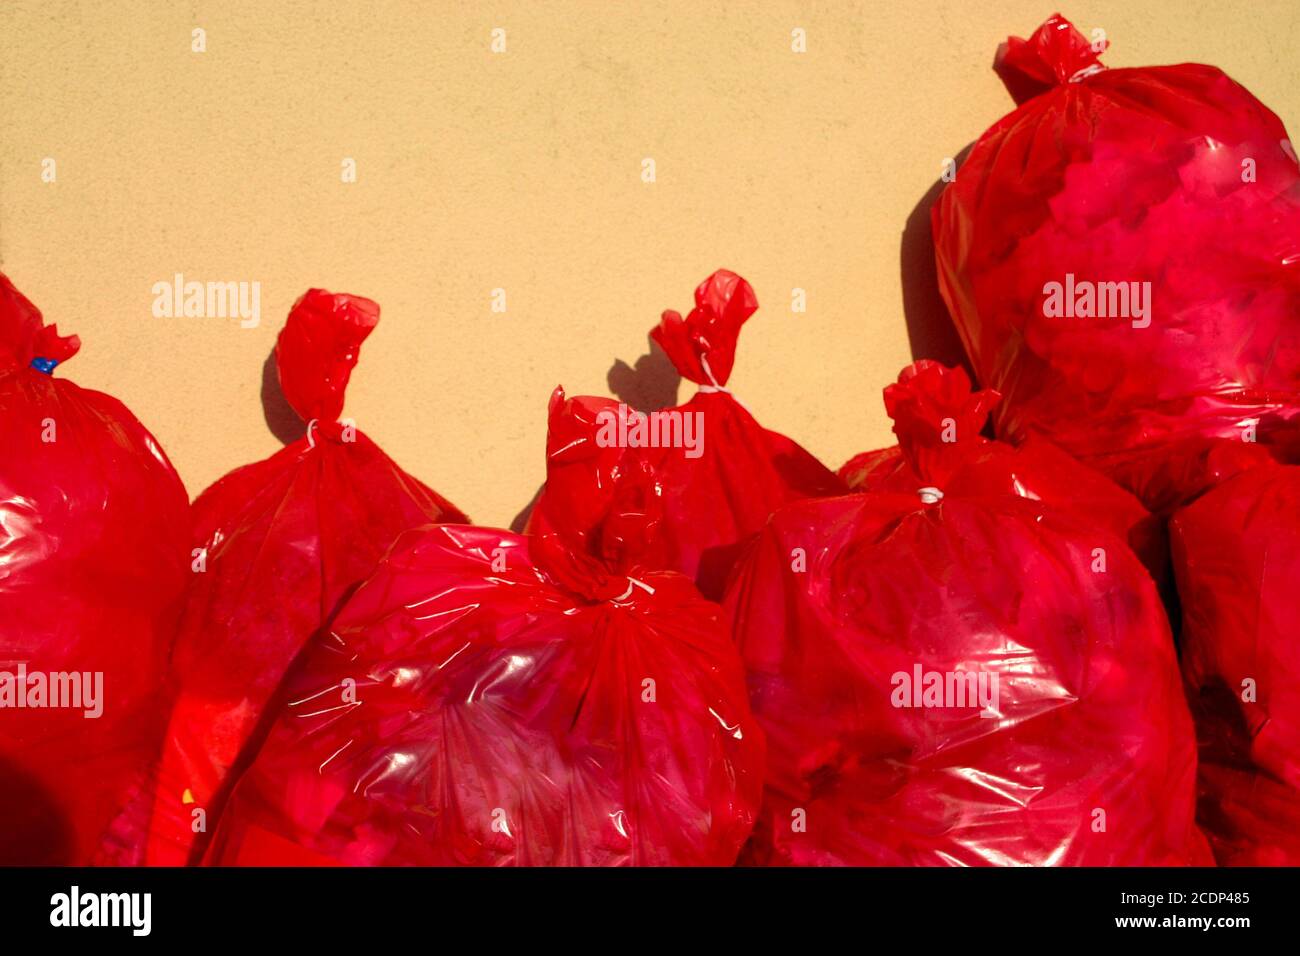 Group of Red Garbage Bags Stock Photo